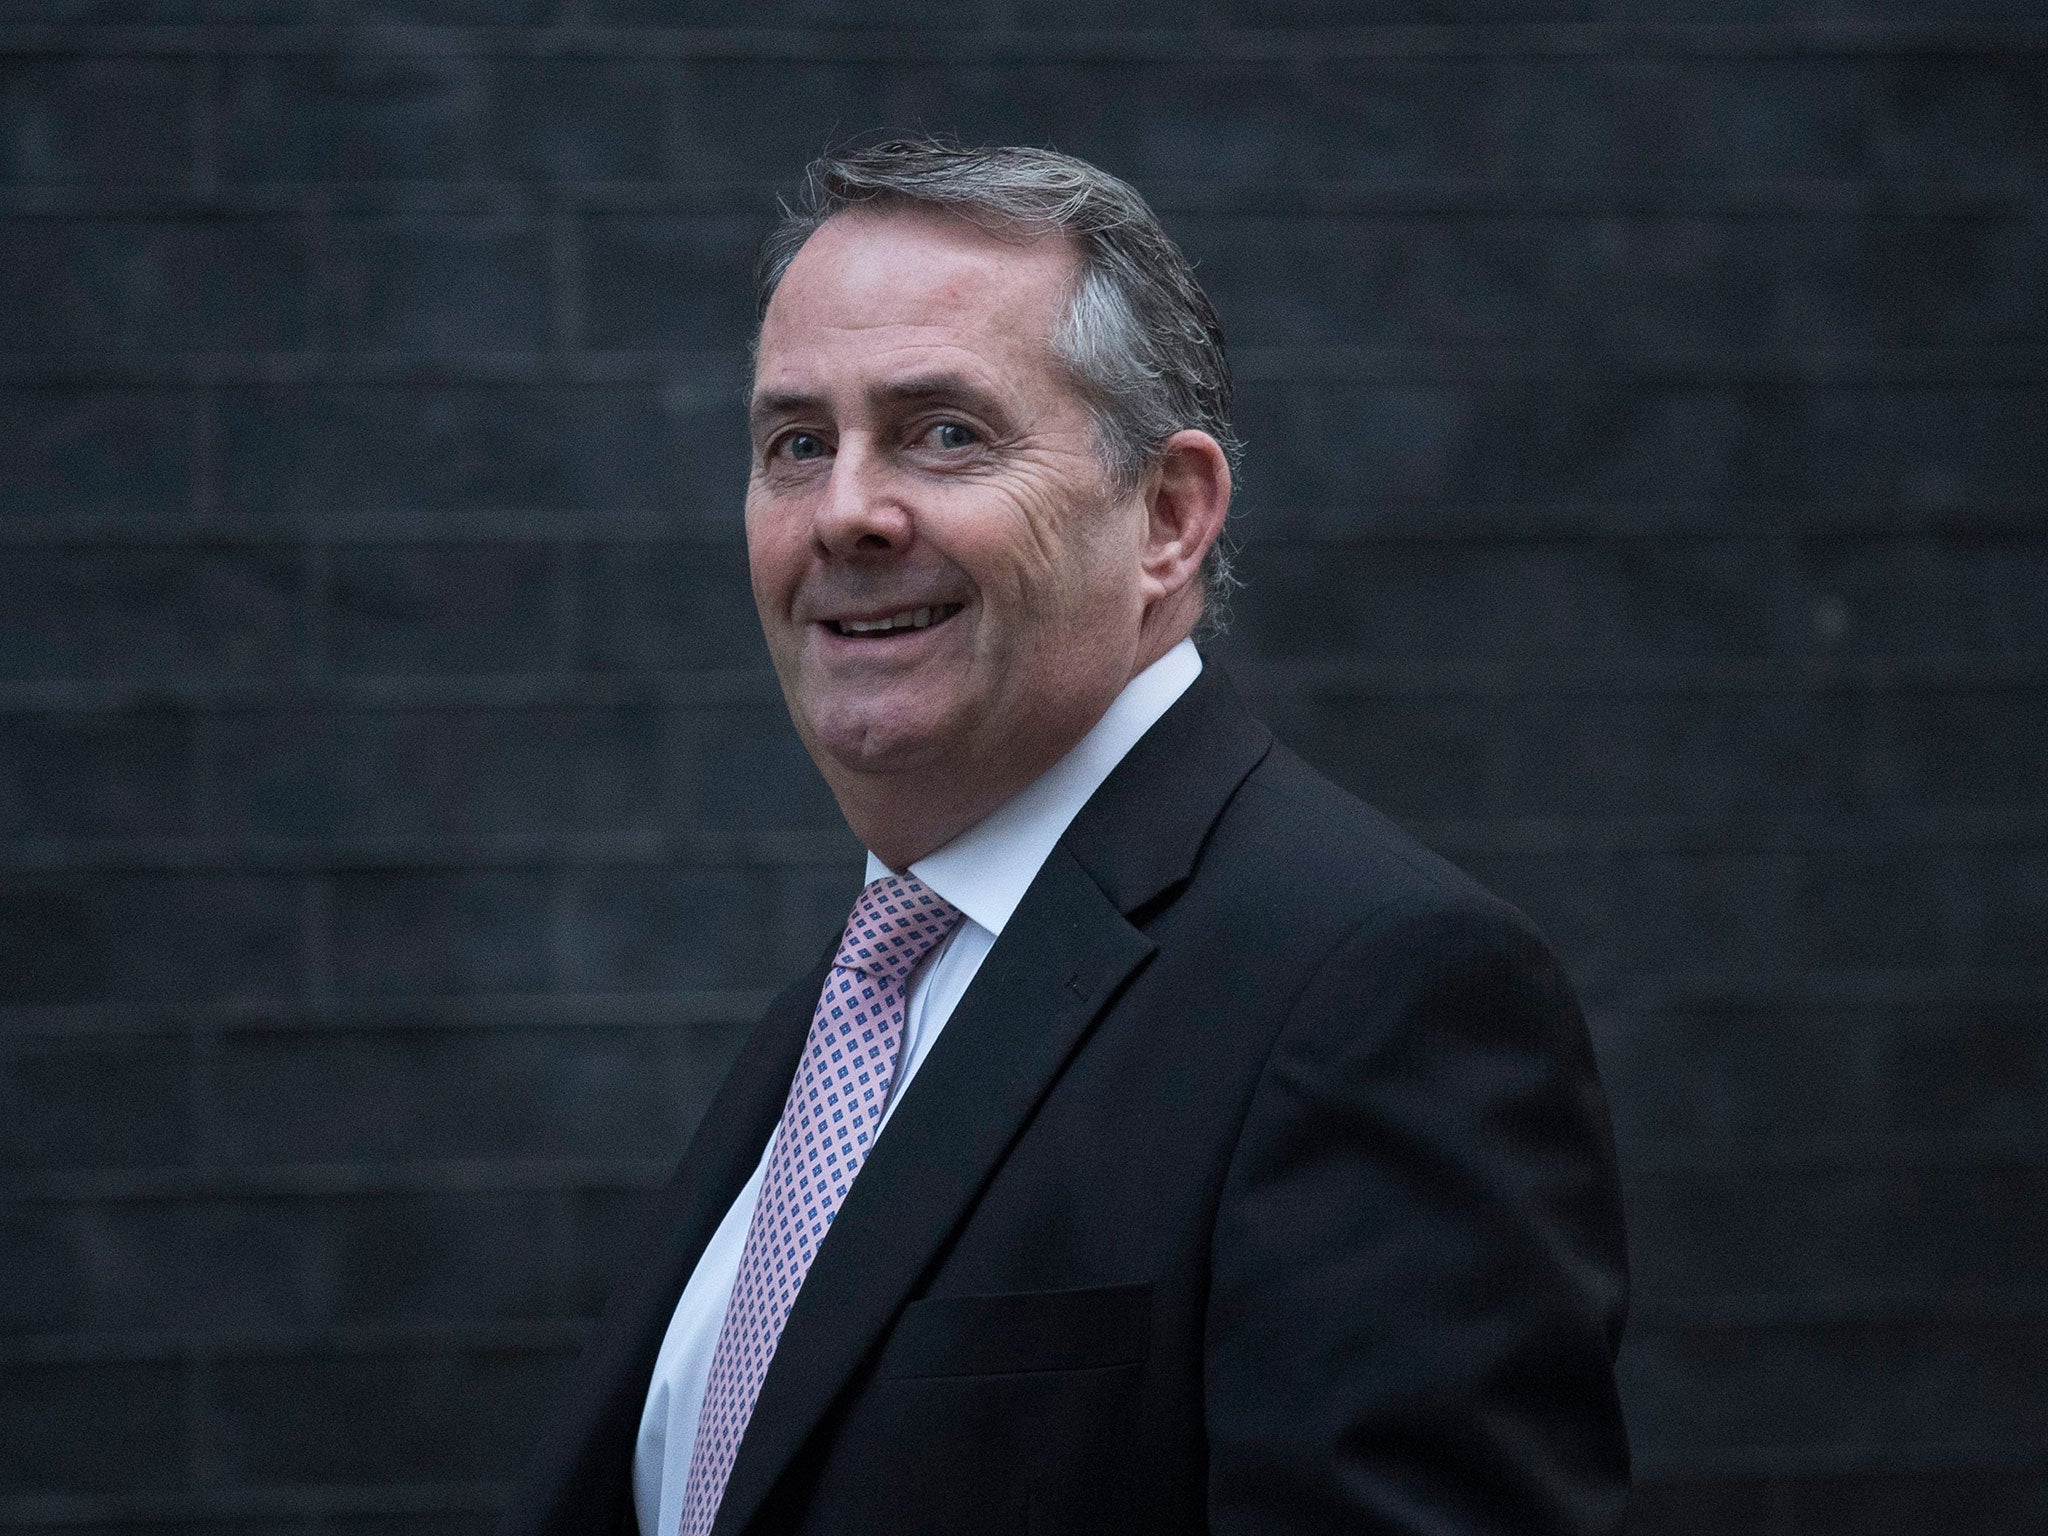 The Interational Trade Secretary has been in South Korea doing groundwork on a deal between the two countries of the kind the UK will lose when it leaves the EU